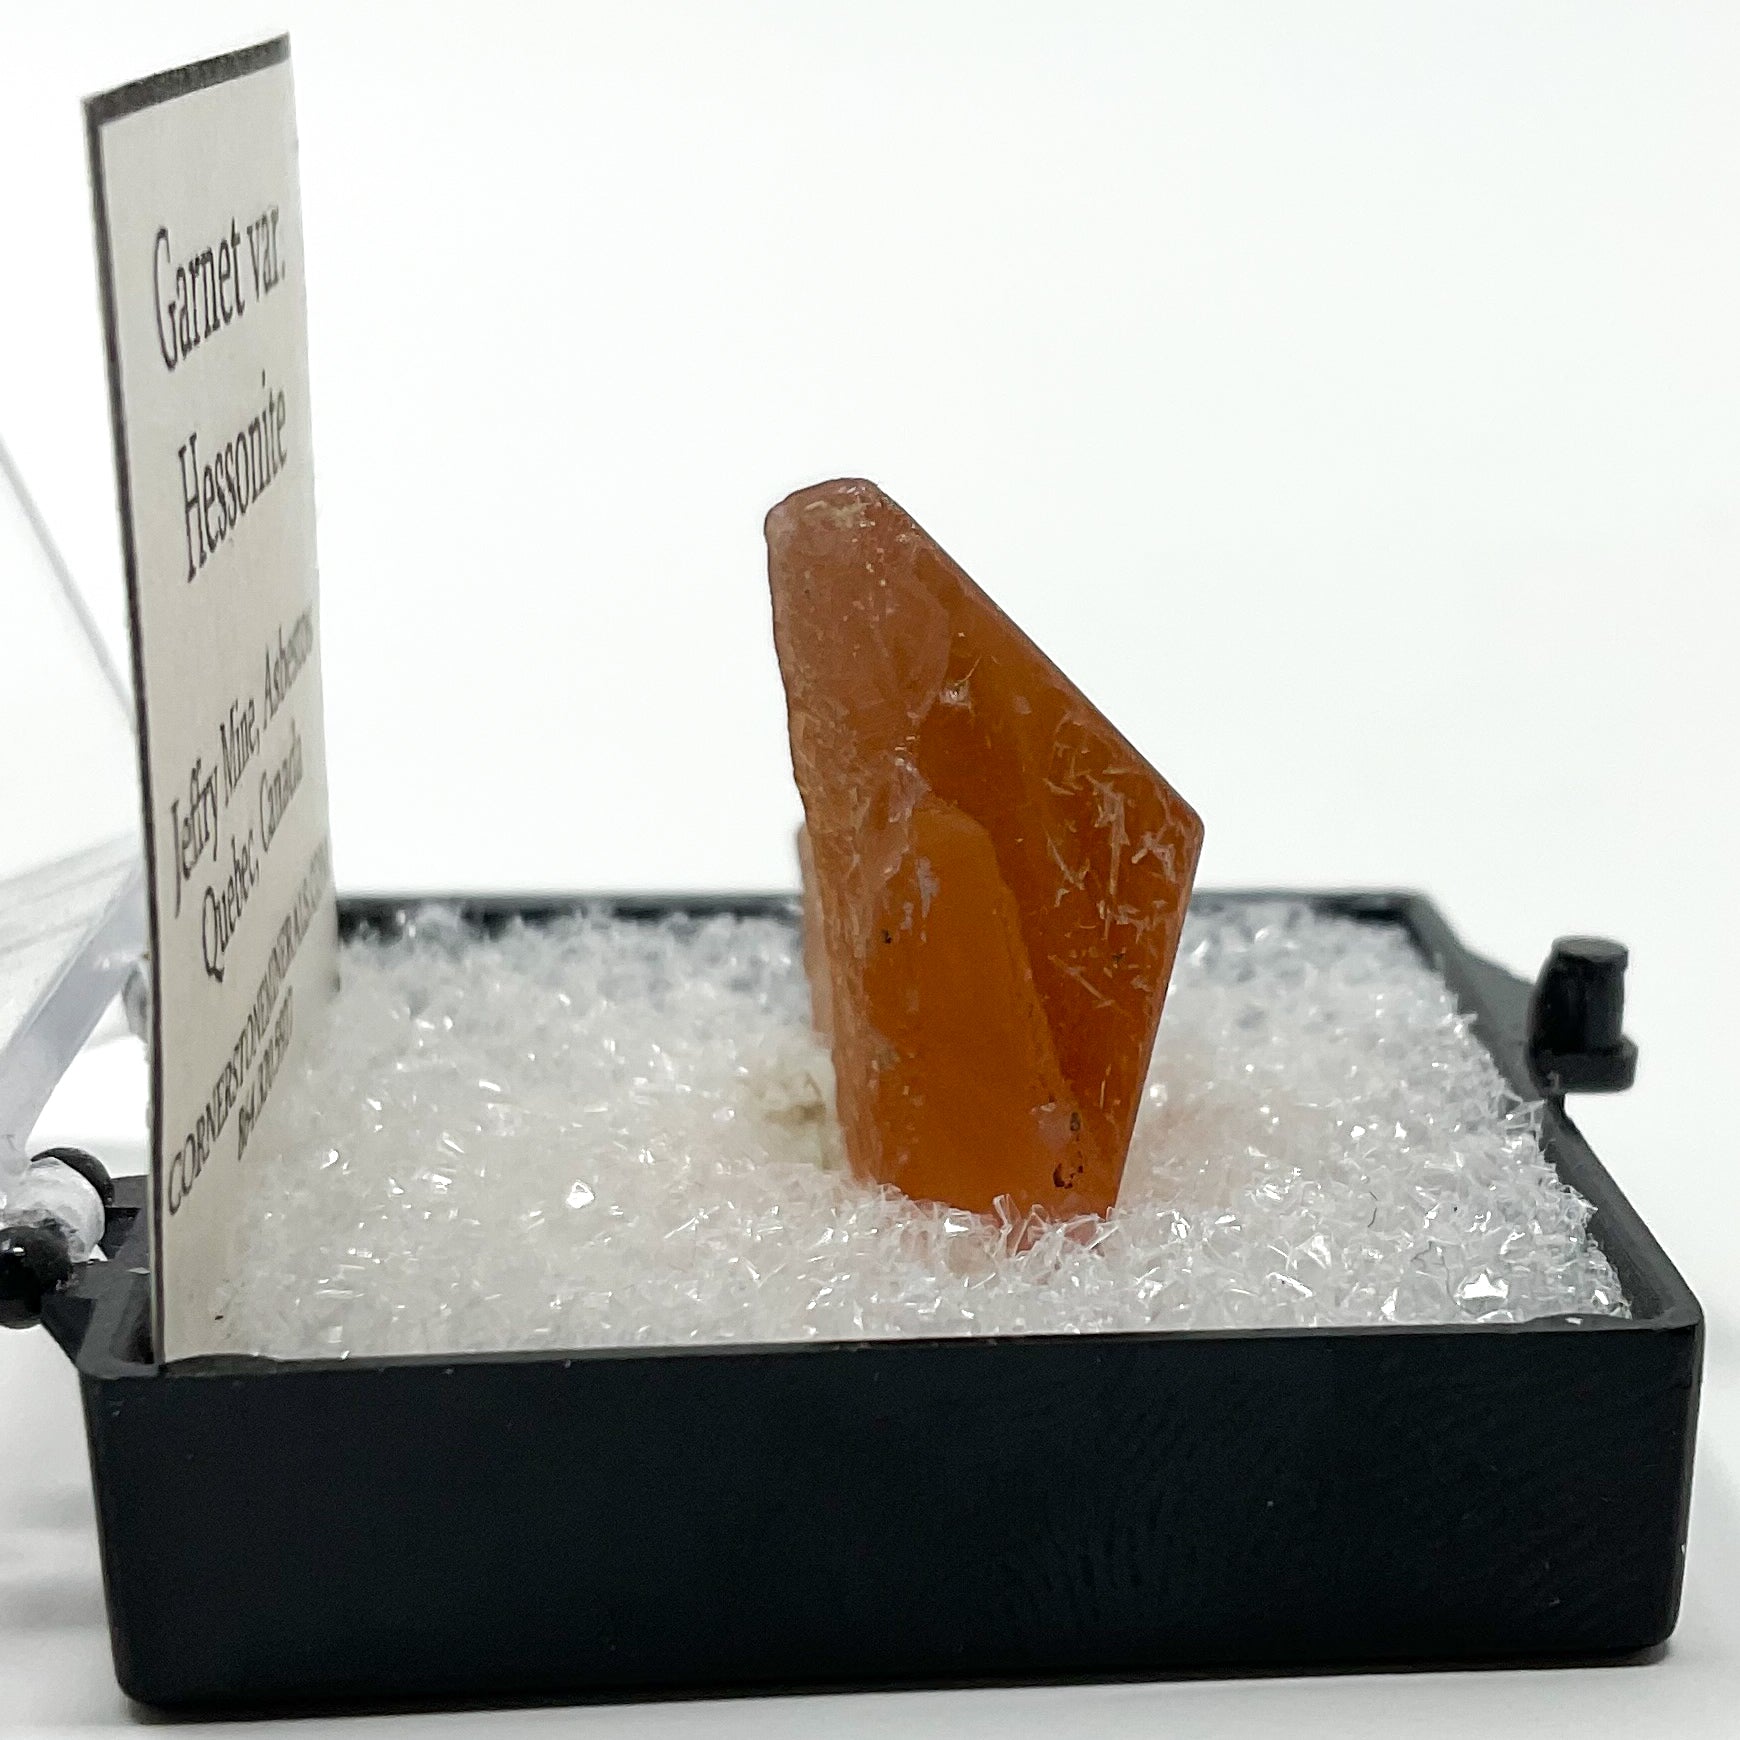 Hessonite Garnet Thumbnail from Jeffry Mine in Asbestos, Quebec, Canada